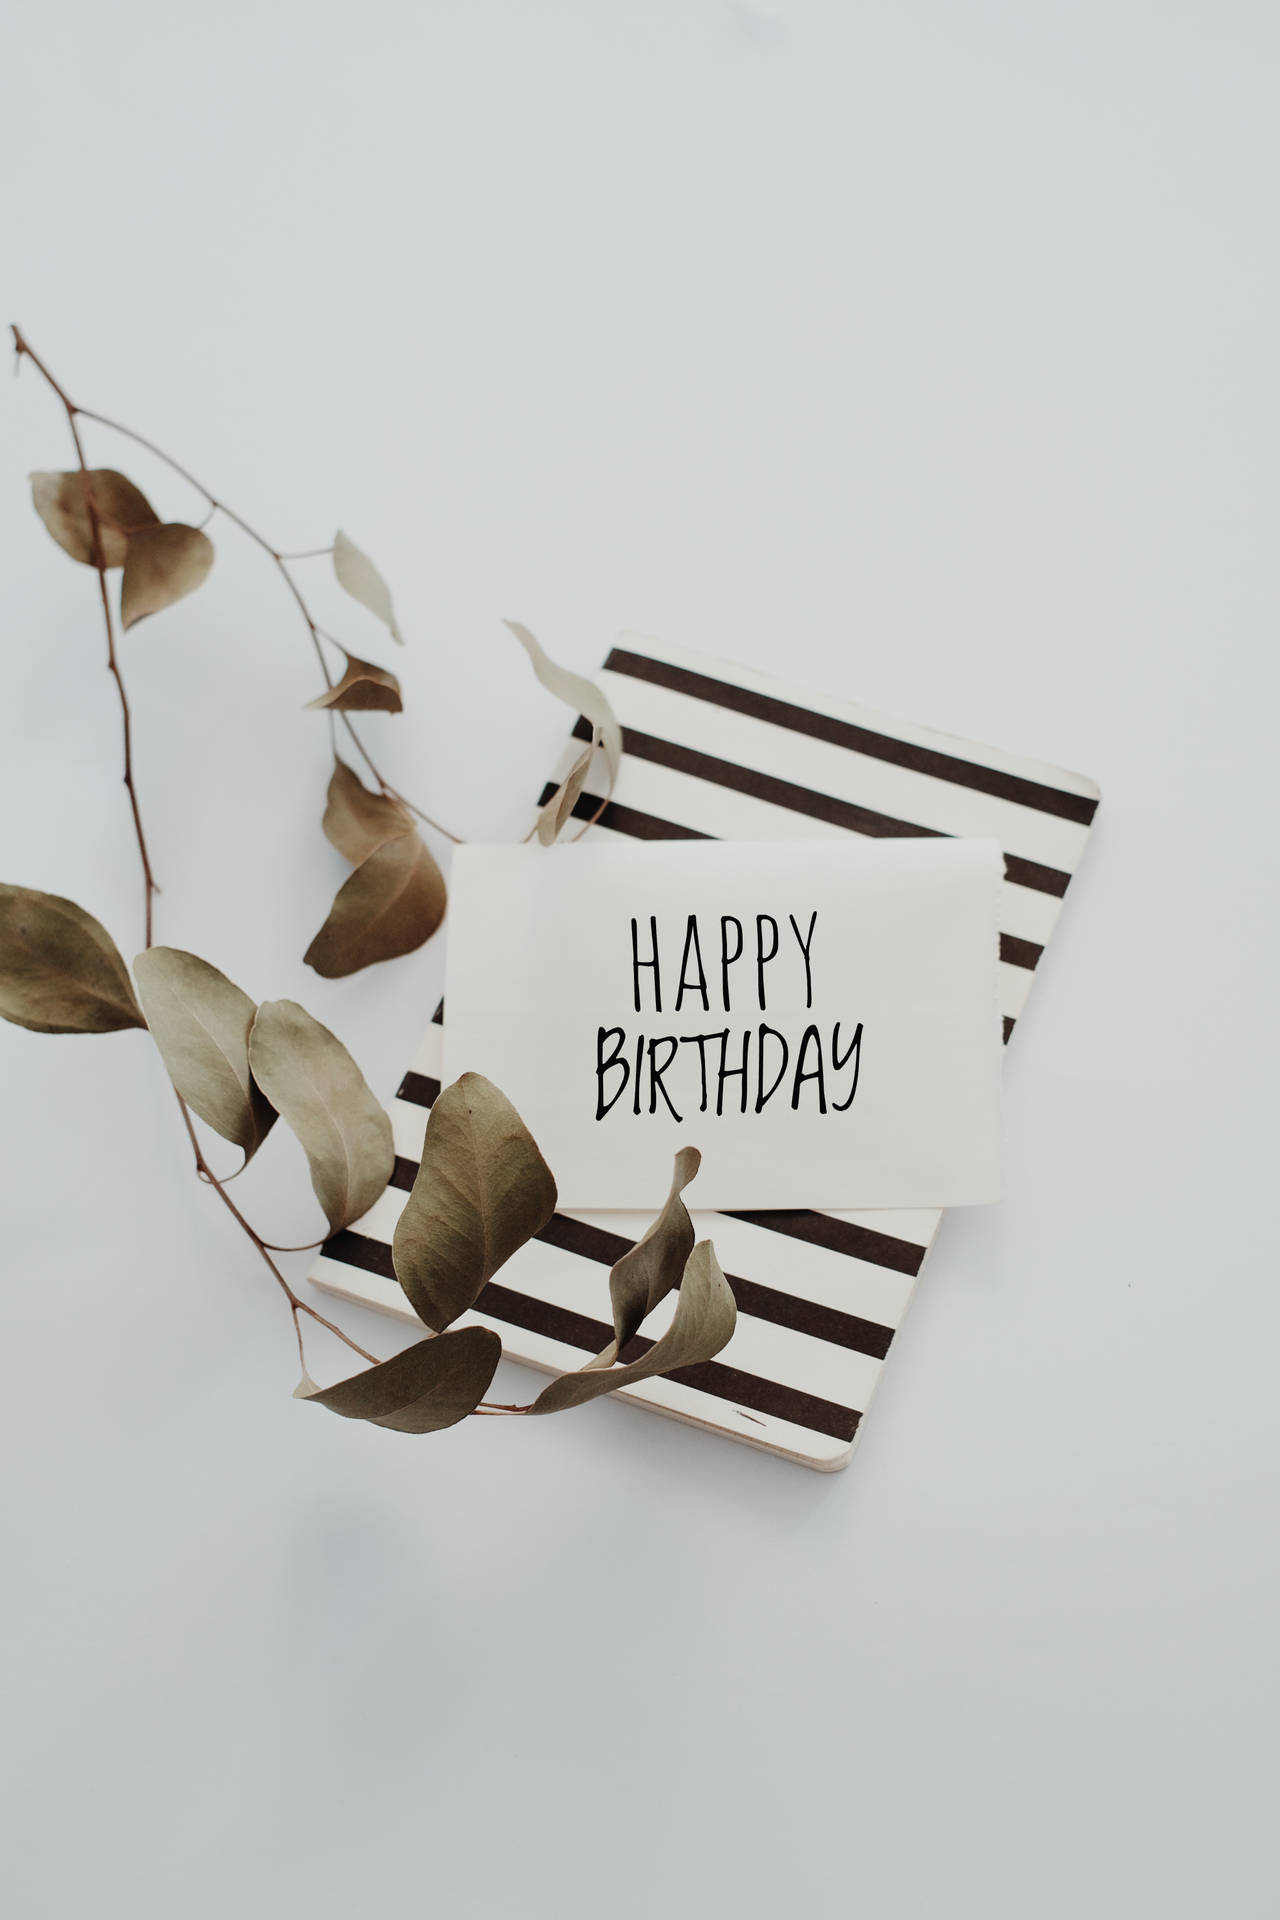 Birthday Black And White Greeting Card Background